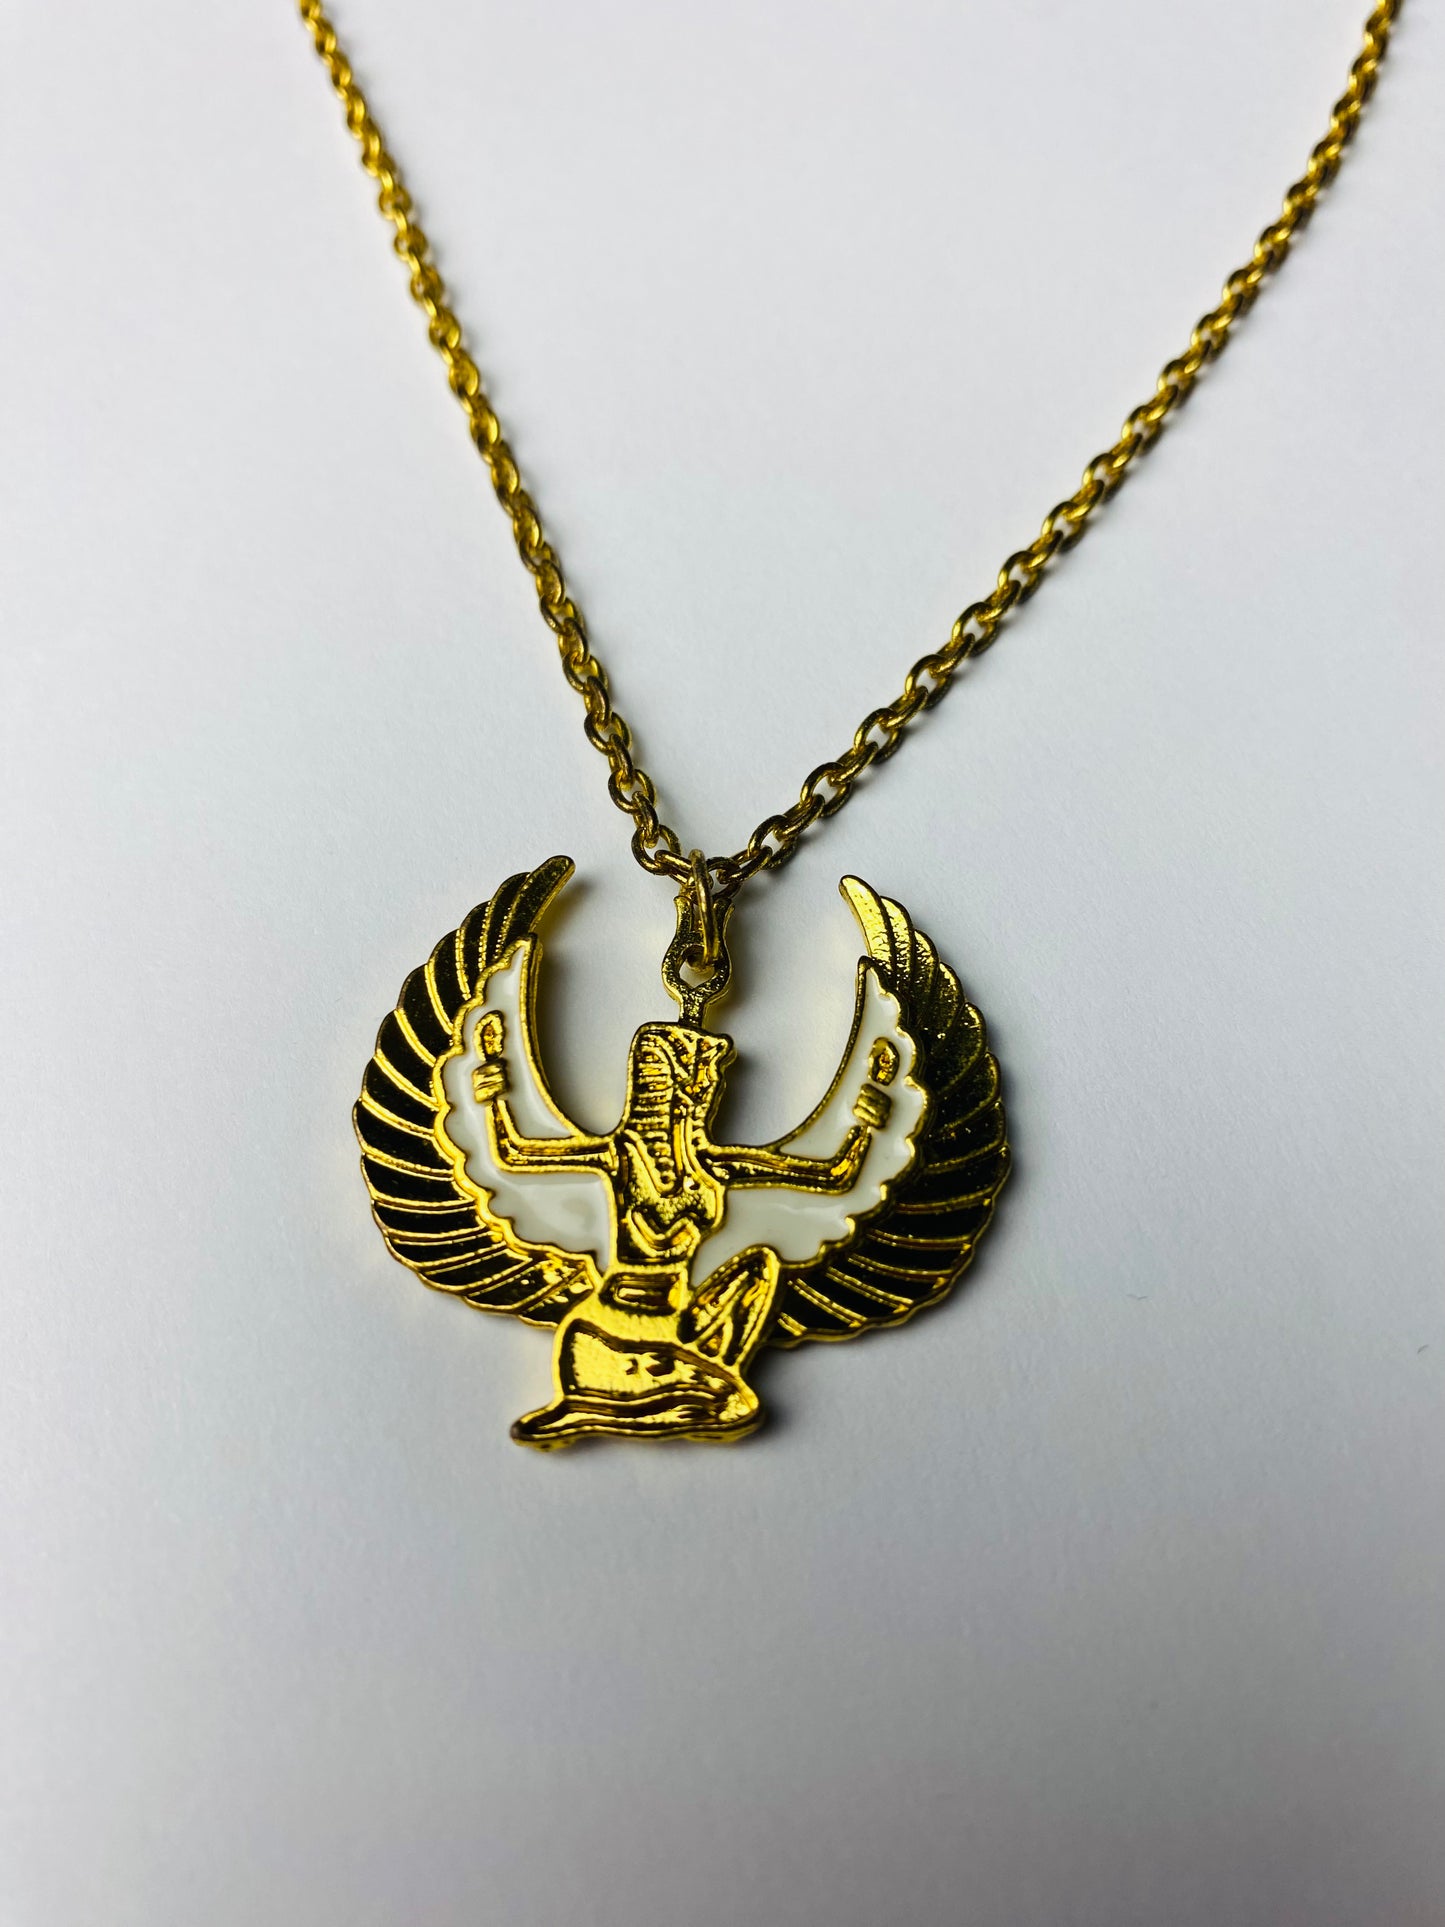 Queen isis necklace